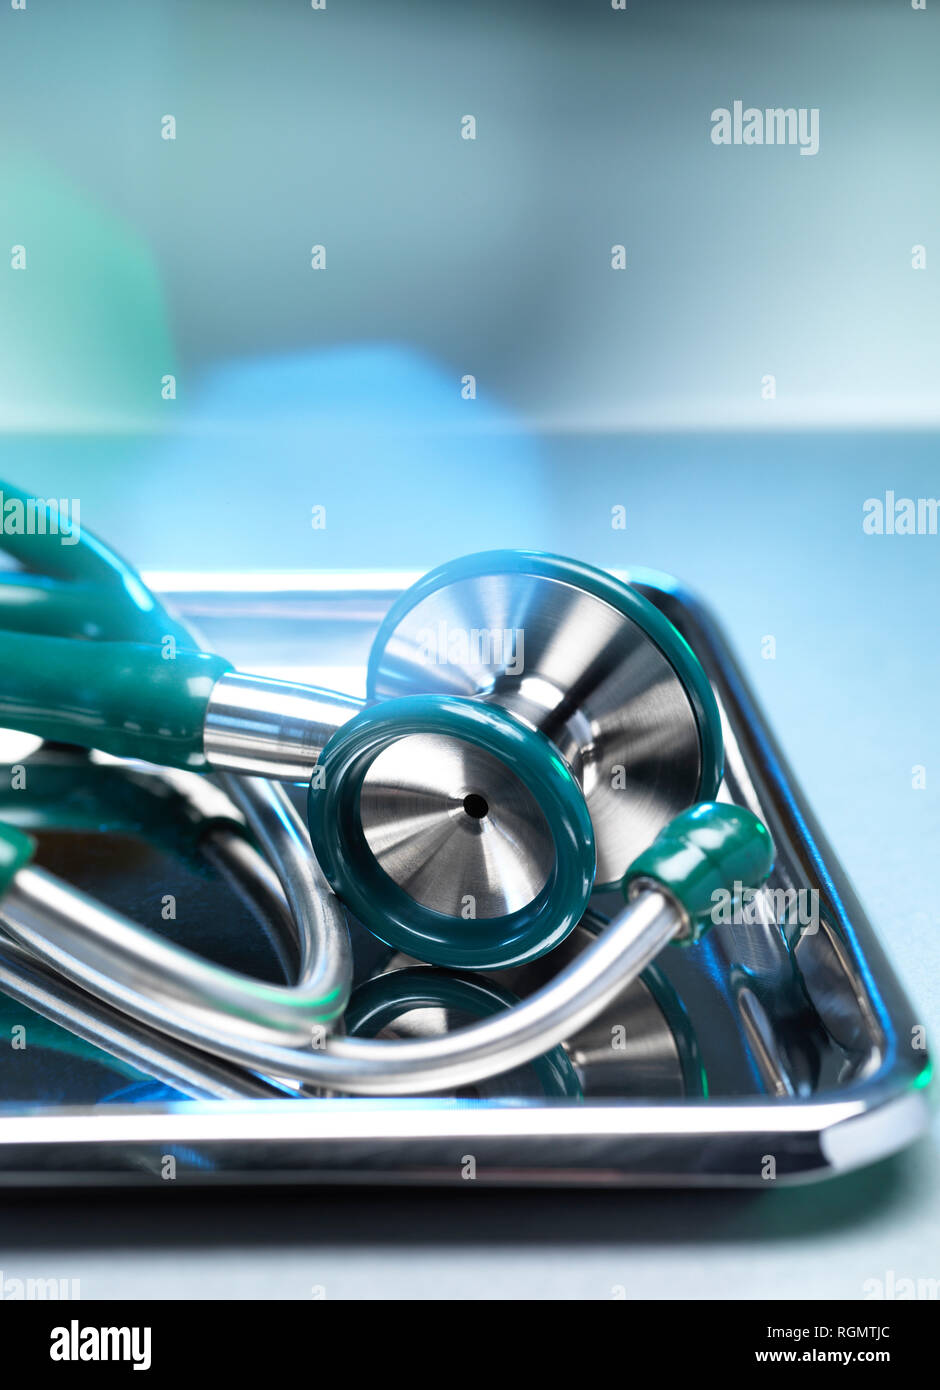 Surgical instruments, stethoscope in a bowl Stock Photo